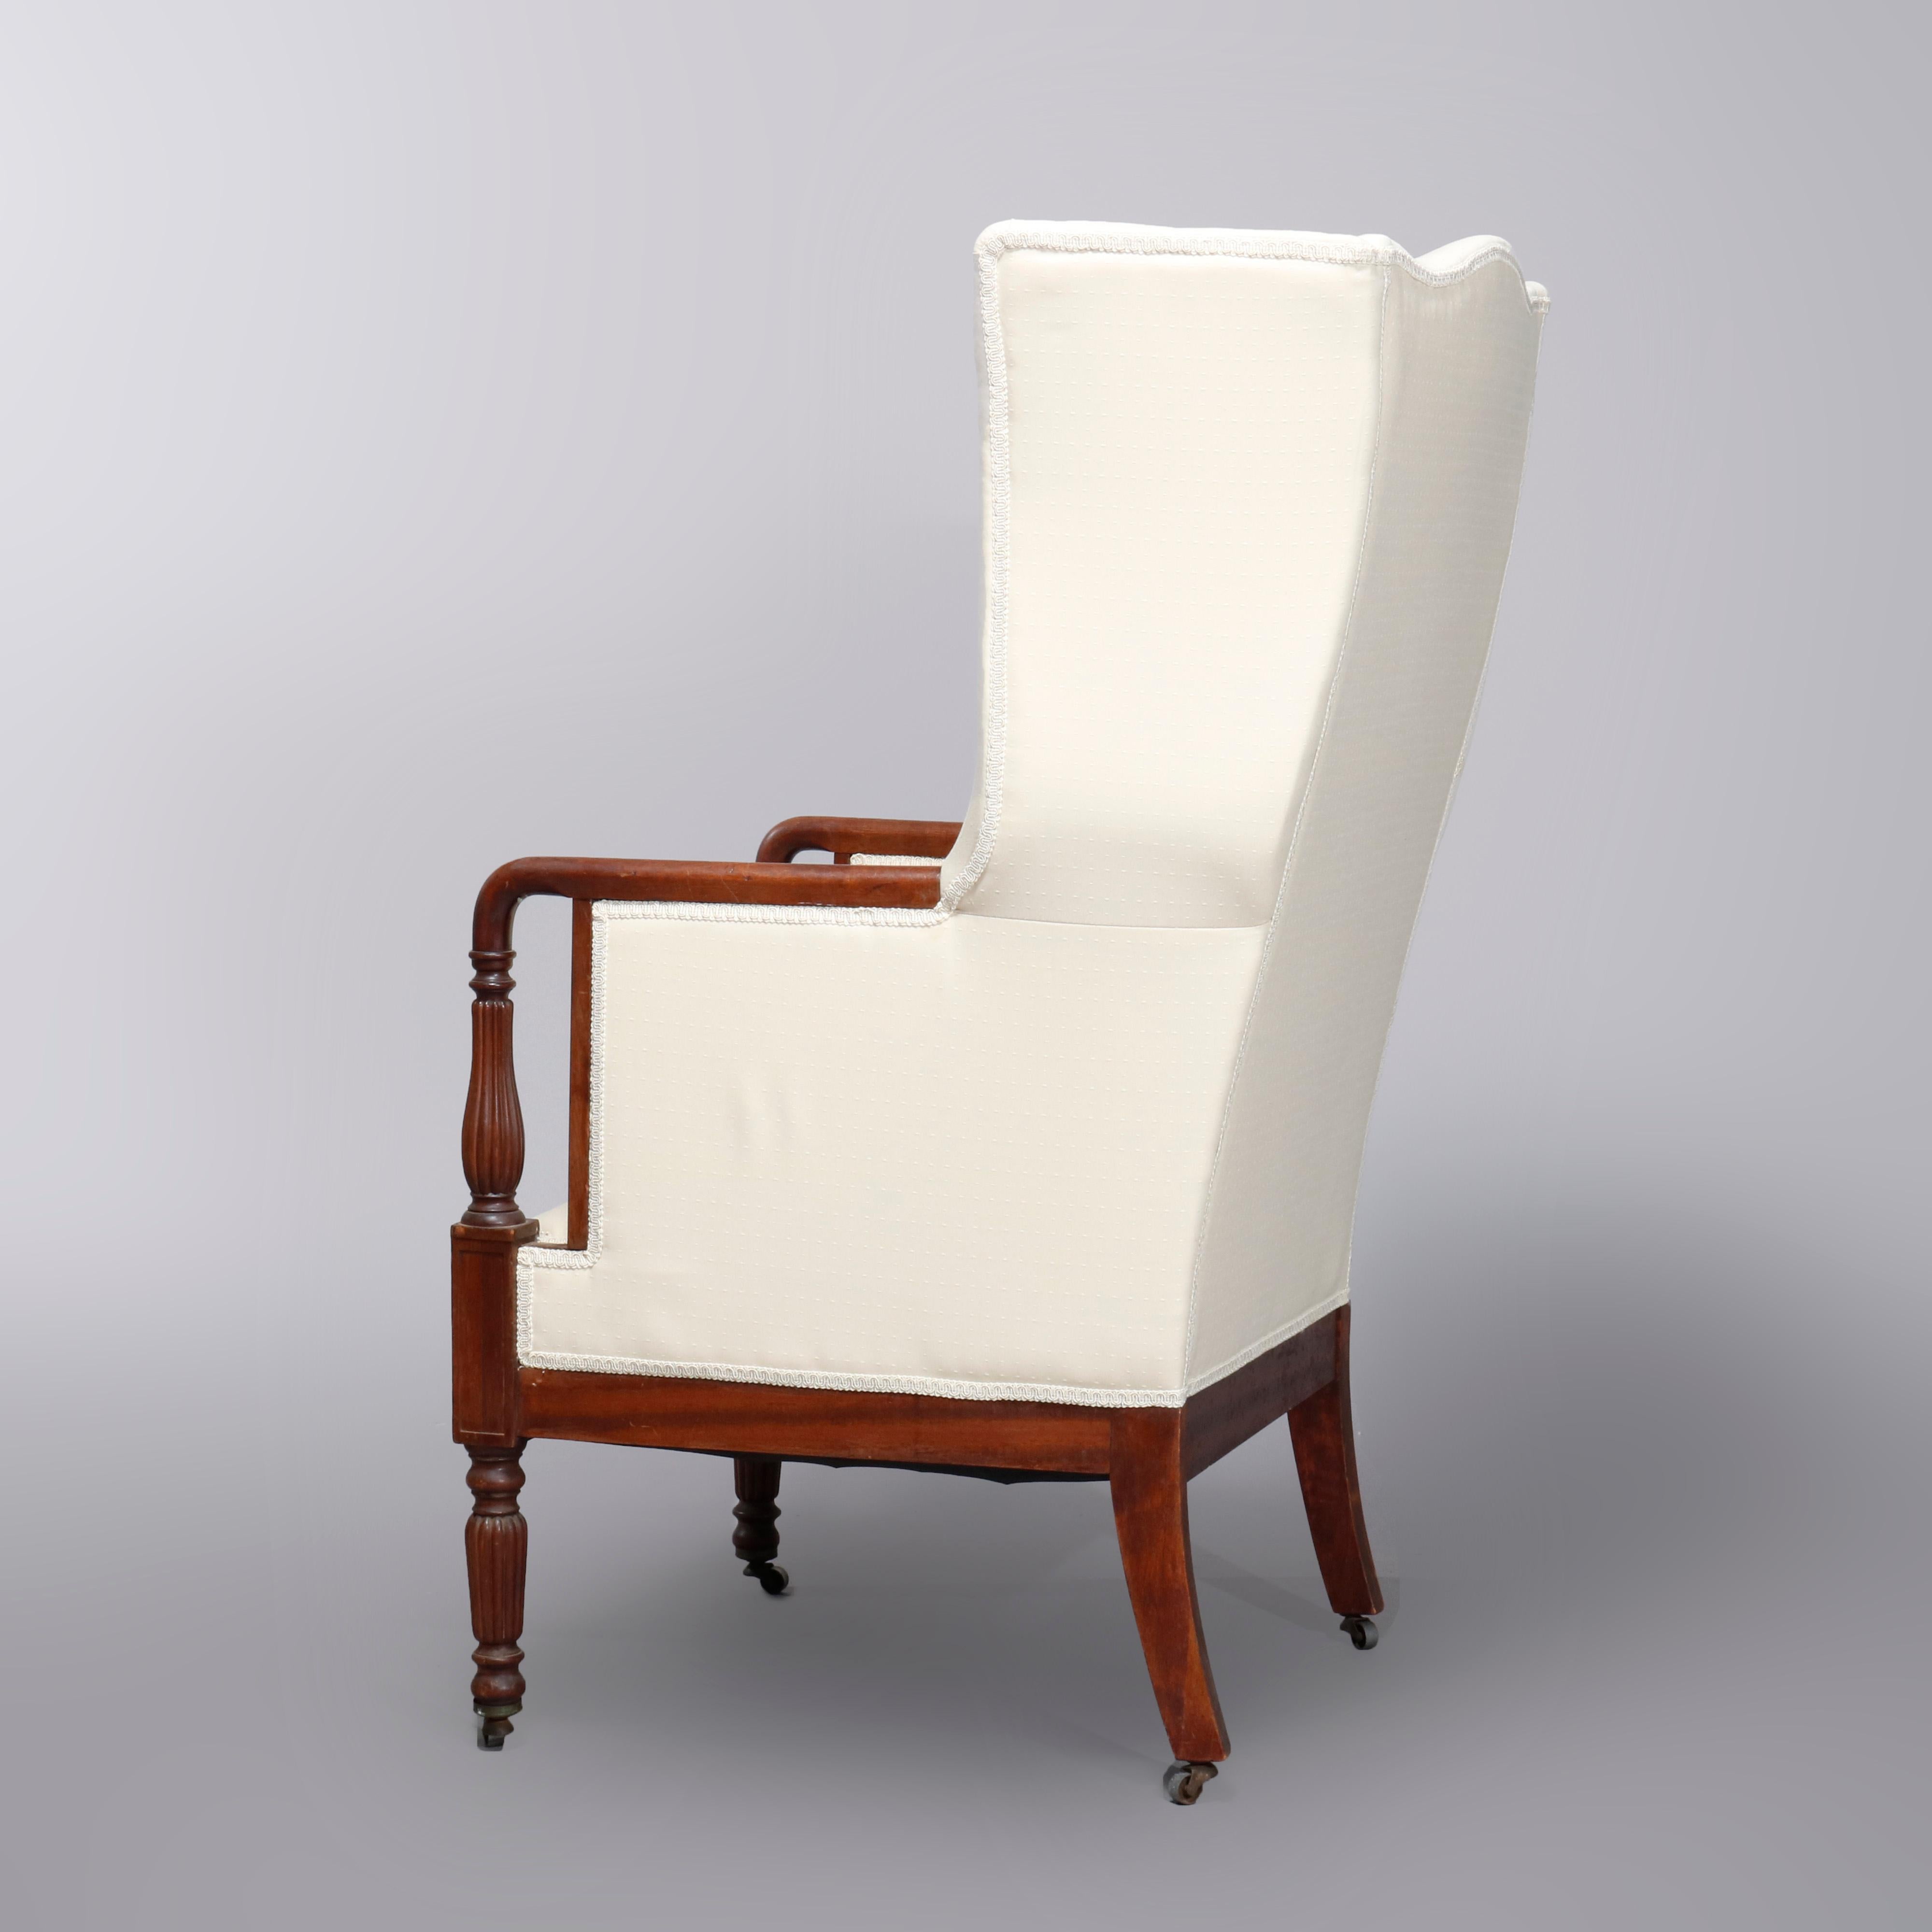 An antique period Sheraton fireside chair offers wingback form with original finish mahogany frame, newly re-upholstered, circa 1830. 

Measures- 47.5